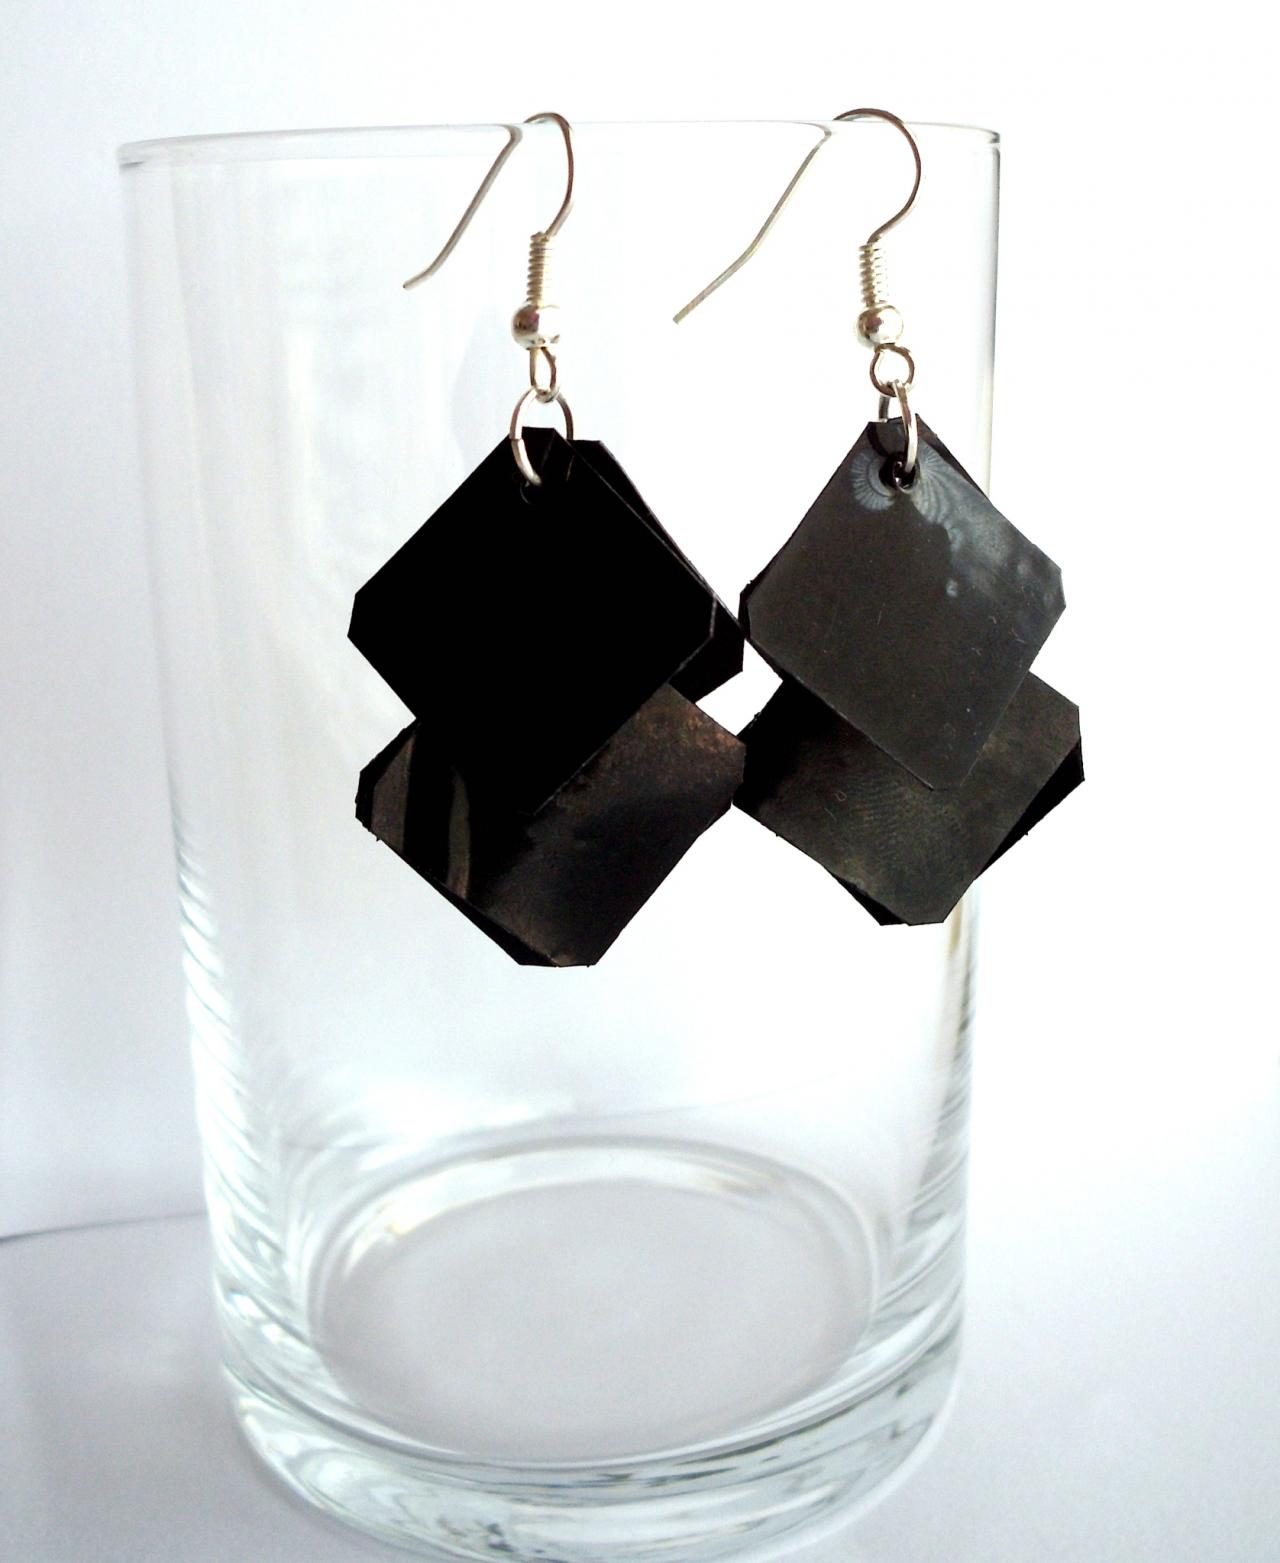 Black Earrings Made Of Recycled Plastic Bottle, Eco-friendly, Upcycled Jewelry, Goth, Modern, Rocker, Minimalist